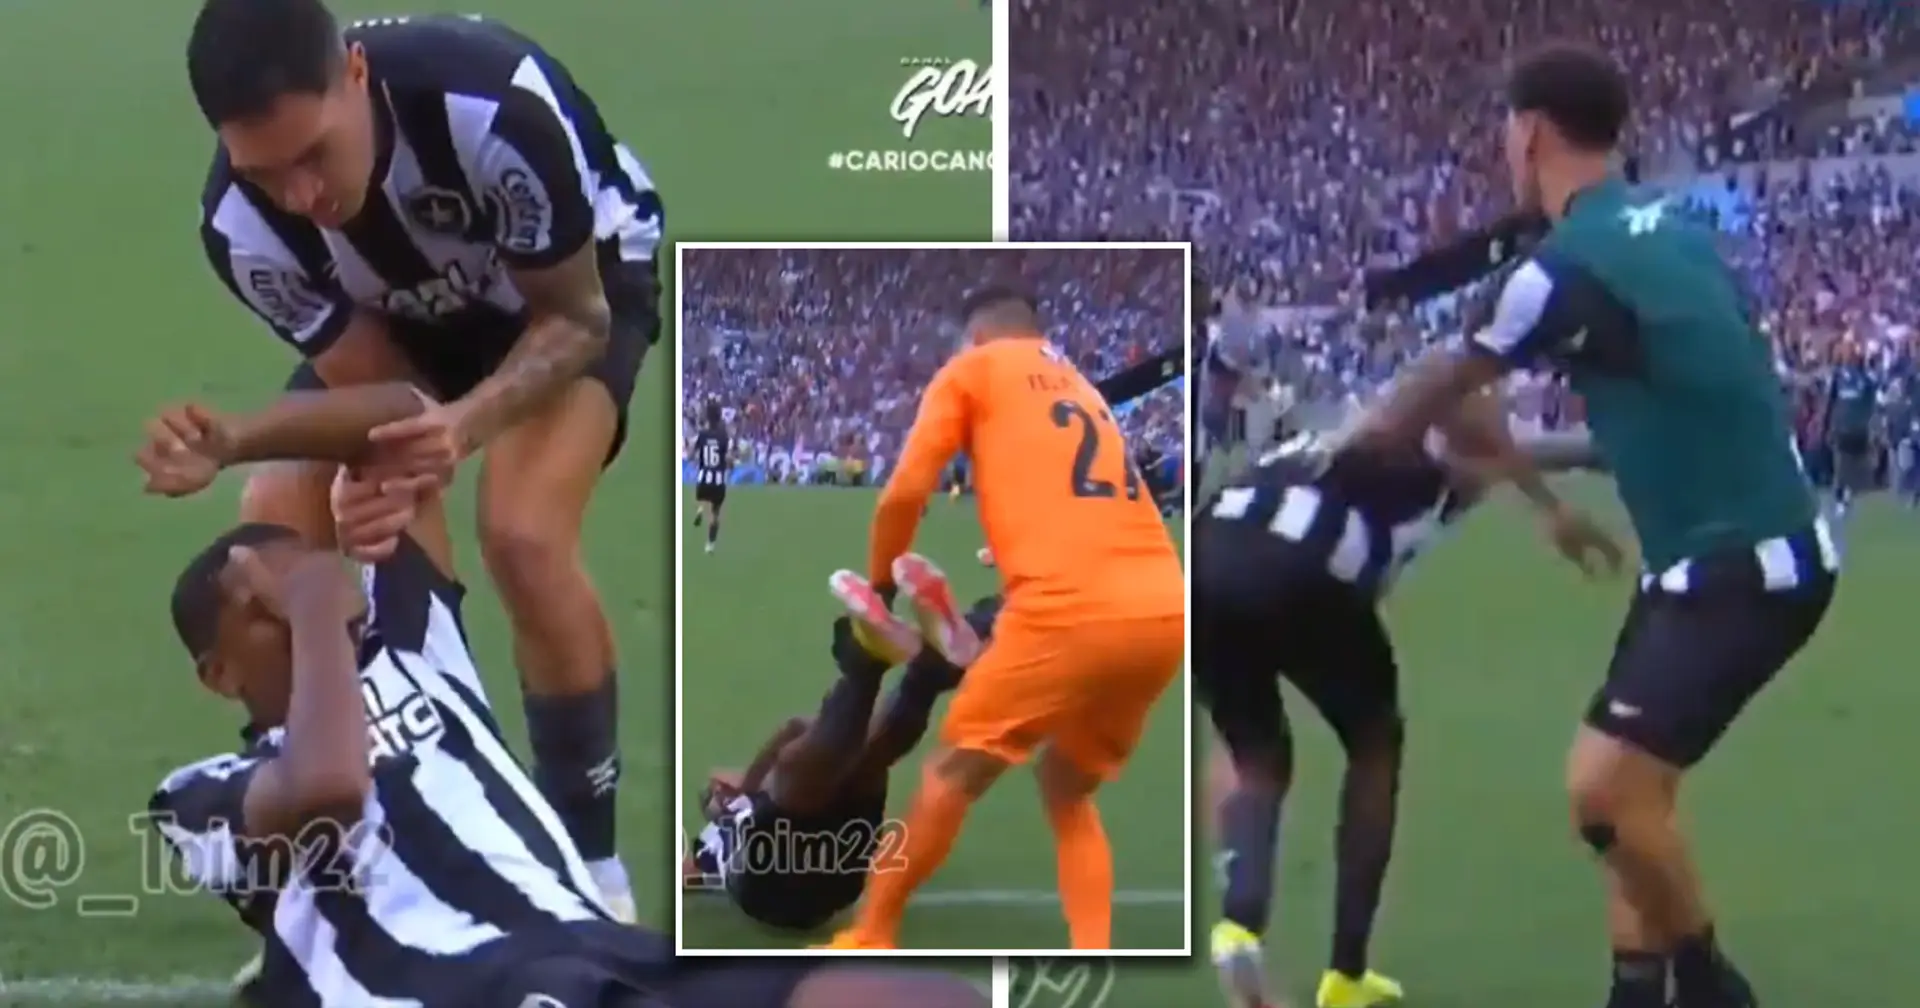 Brazilian football: Botafogo players dragg their 'injured' teammate back and forth to waste some time